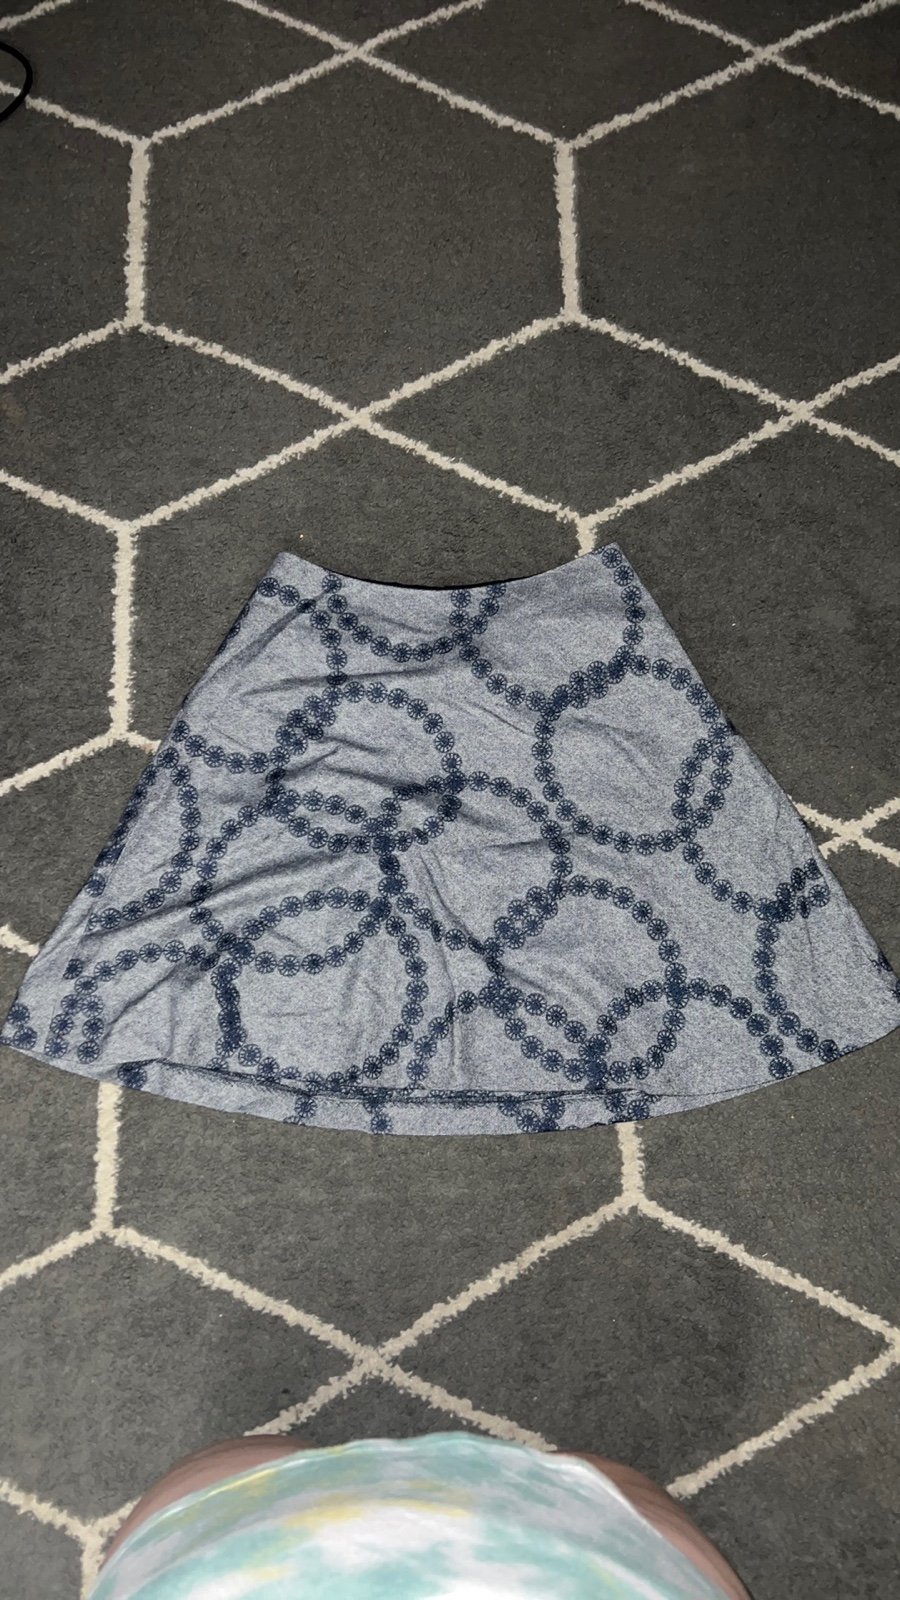 Affordable Boden Libby Circle Wool Blend Embroidered Grey & Blue Skirt Size 6R PBesDgz9w Outlet Store